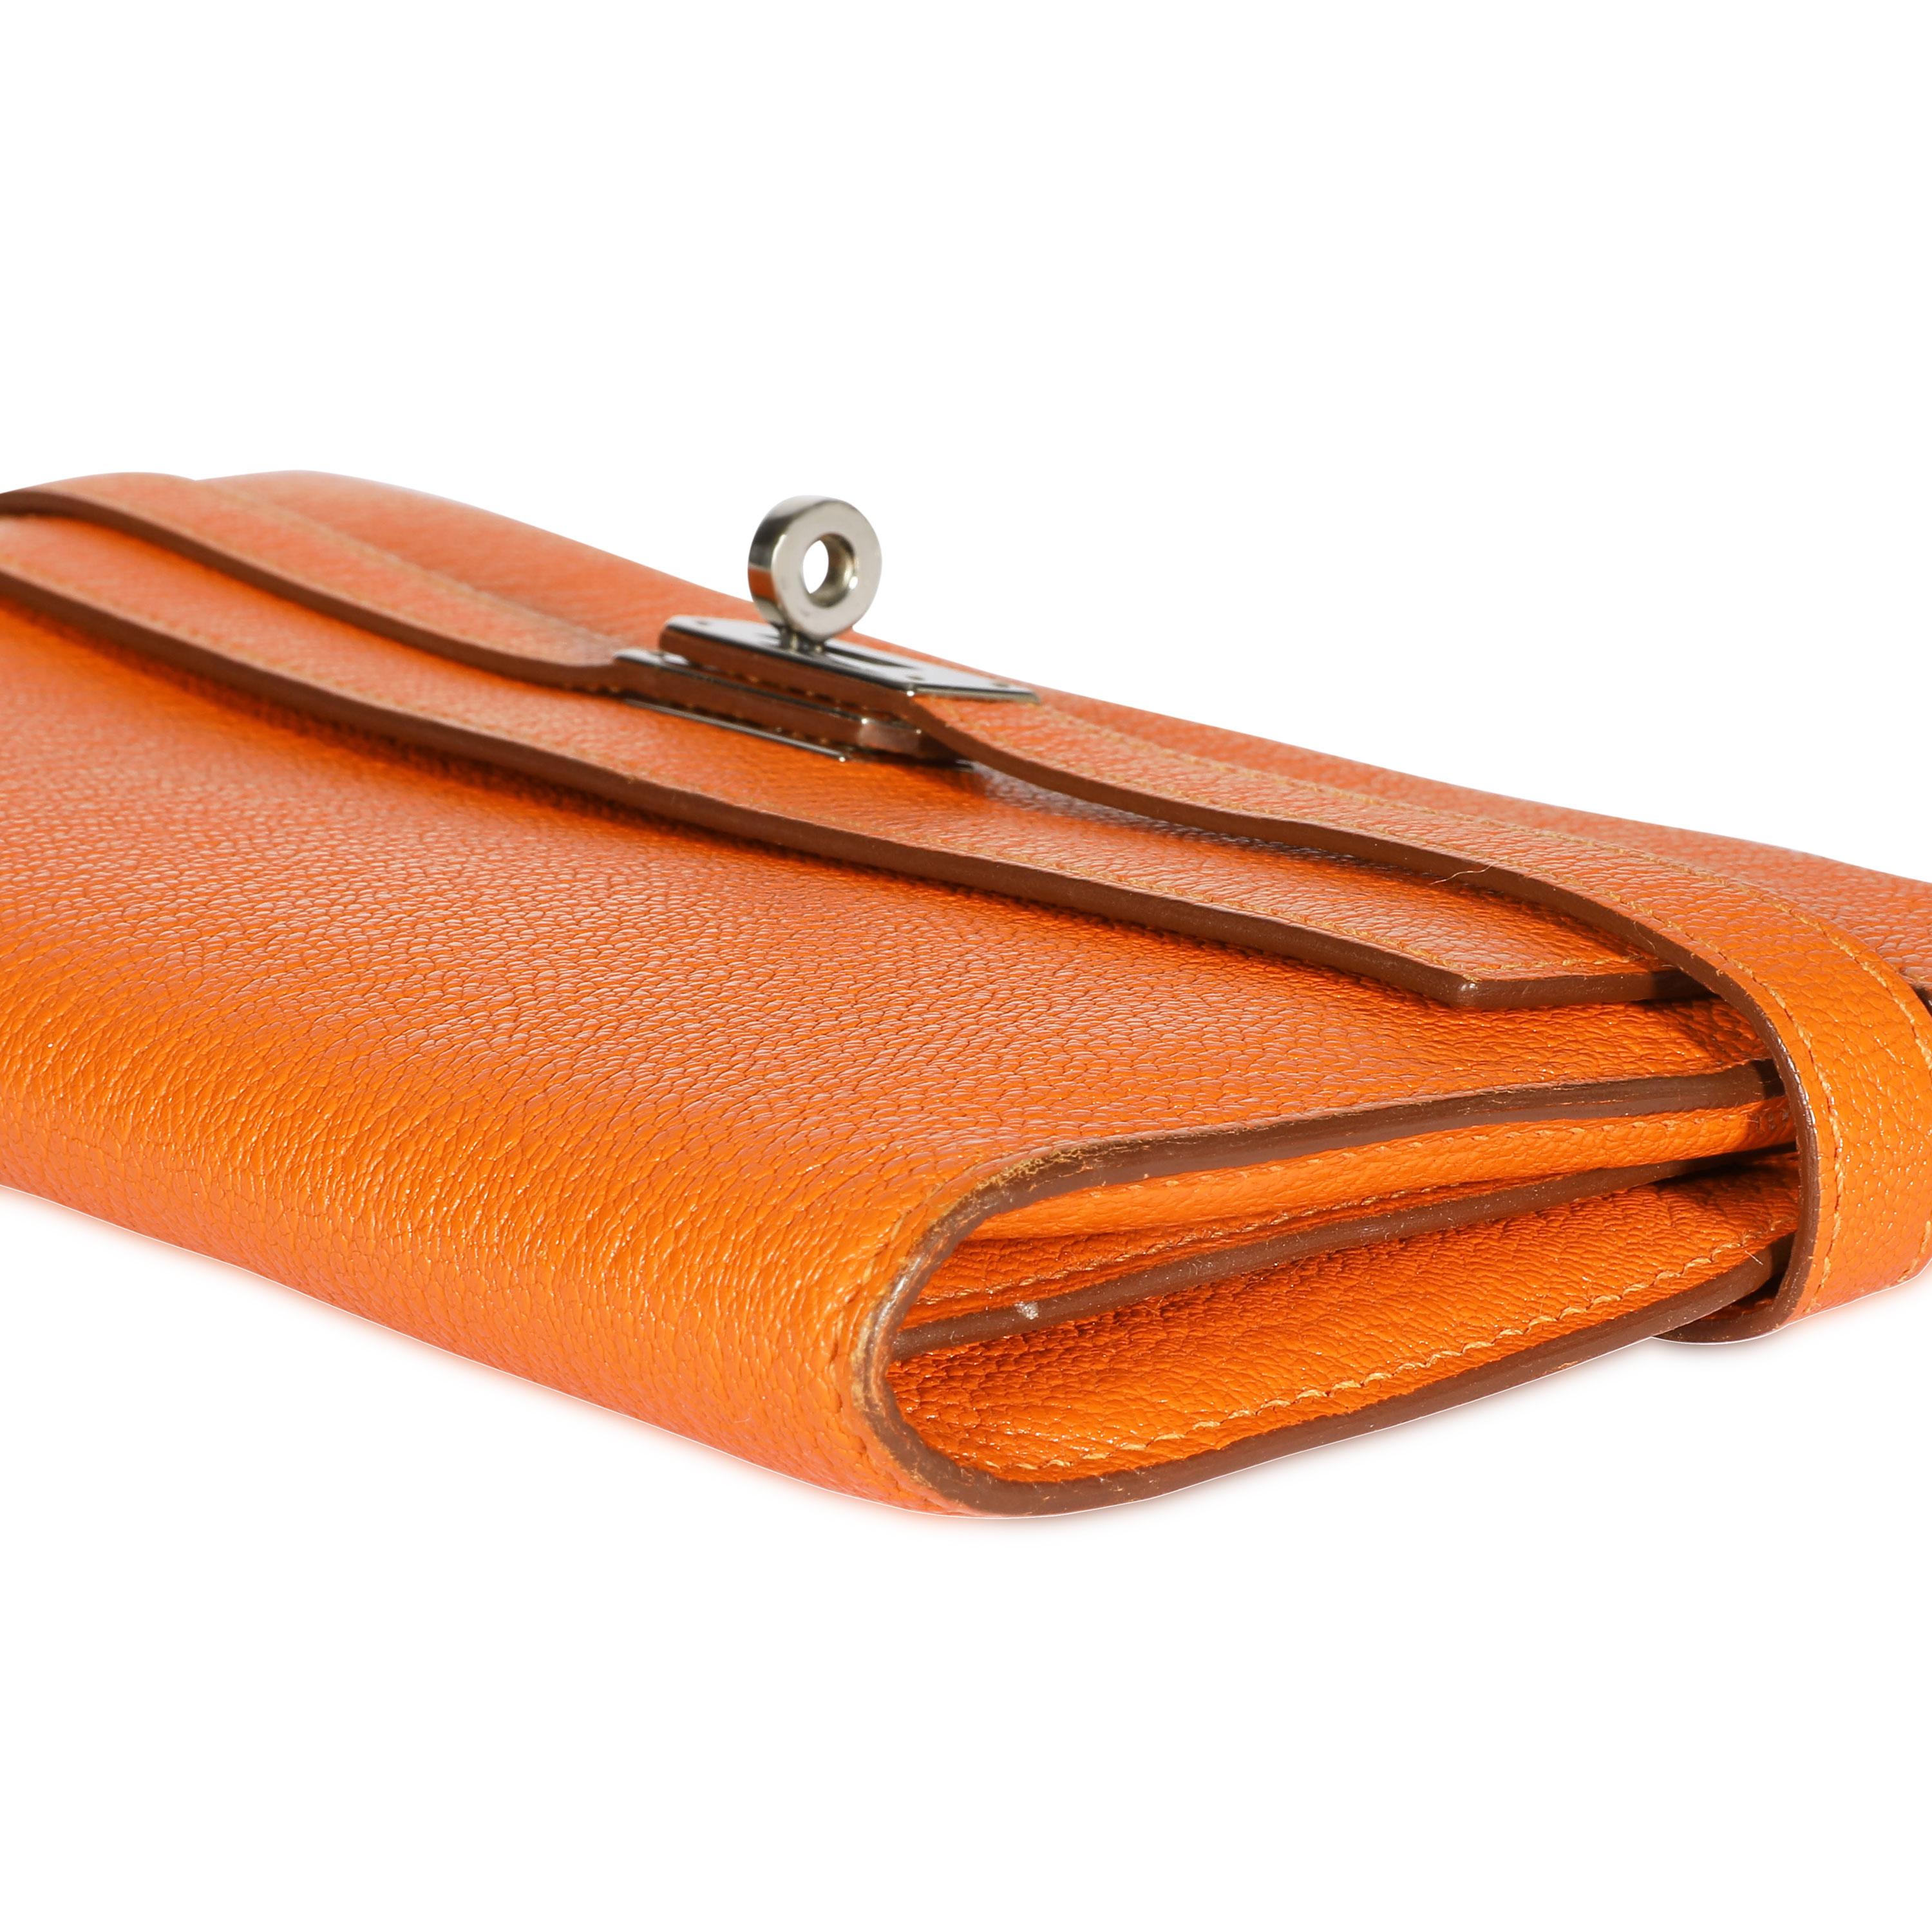 Listing Title: Hermès Orange Chévre Mysore Kelly Wallet with Palladium Hardware
SKU: 107815
MSRP: USD 3,675.00
Condition: Pre-owned (3000)
Condition Description: The Kelly wallet is the ultimate accessory. Crafted in Chévre leather in the iconic